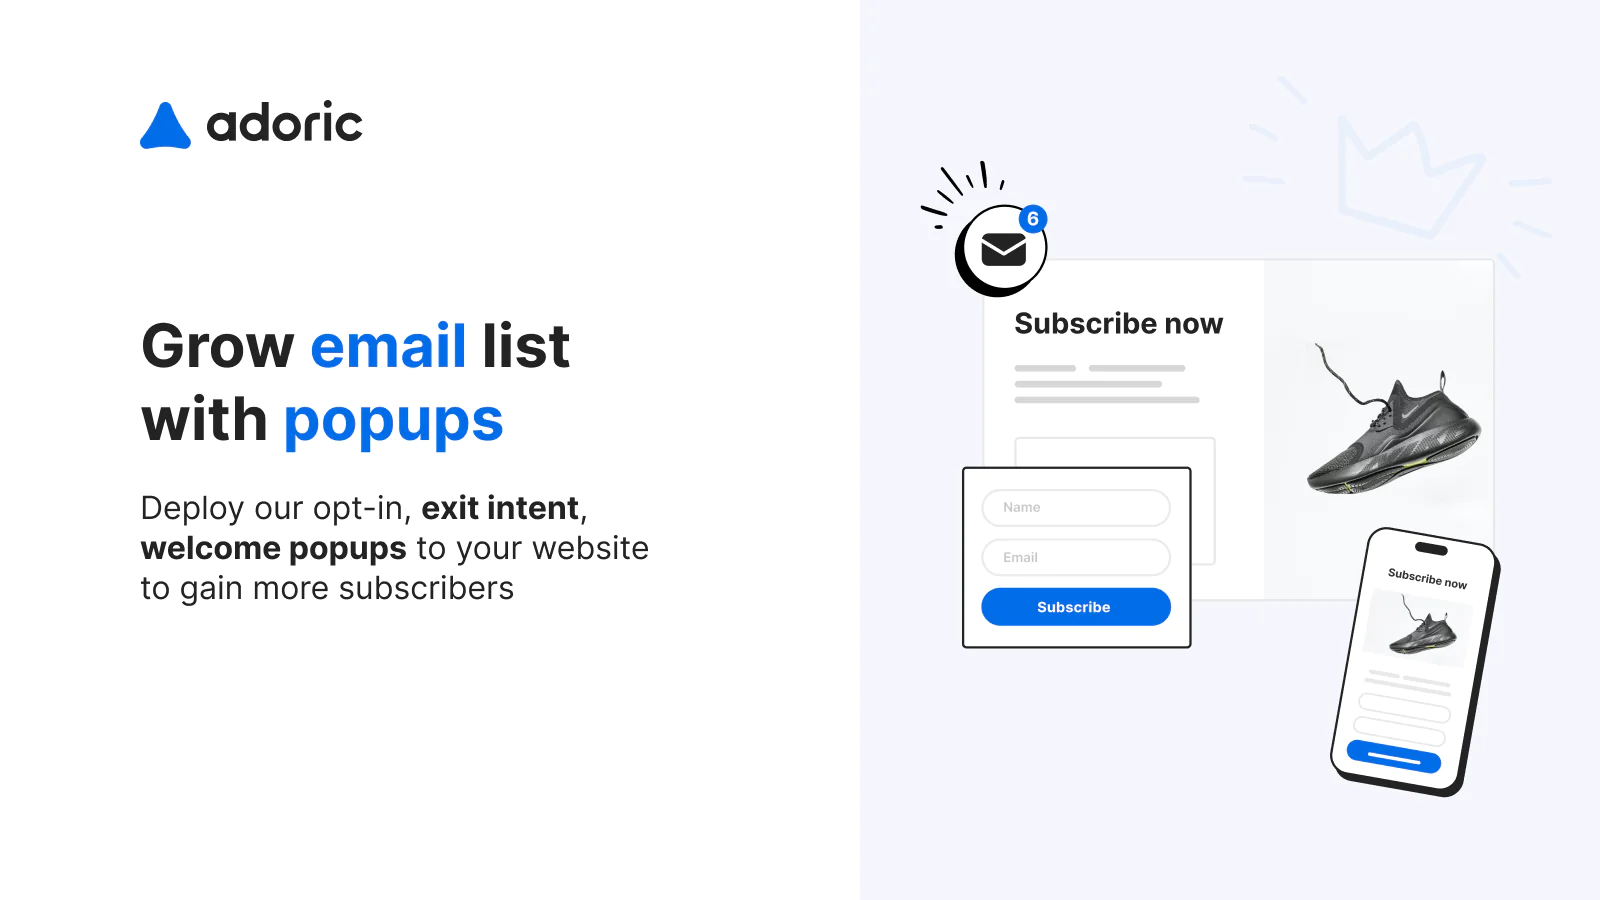  Adoriс: Upsell & Email Pop Ups Adoriс: Upsell & Email Pop Ups deploy your opt-in, exit intent, welcome popups to your website to gain more suscribers.